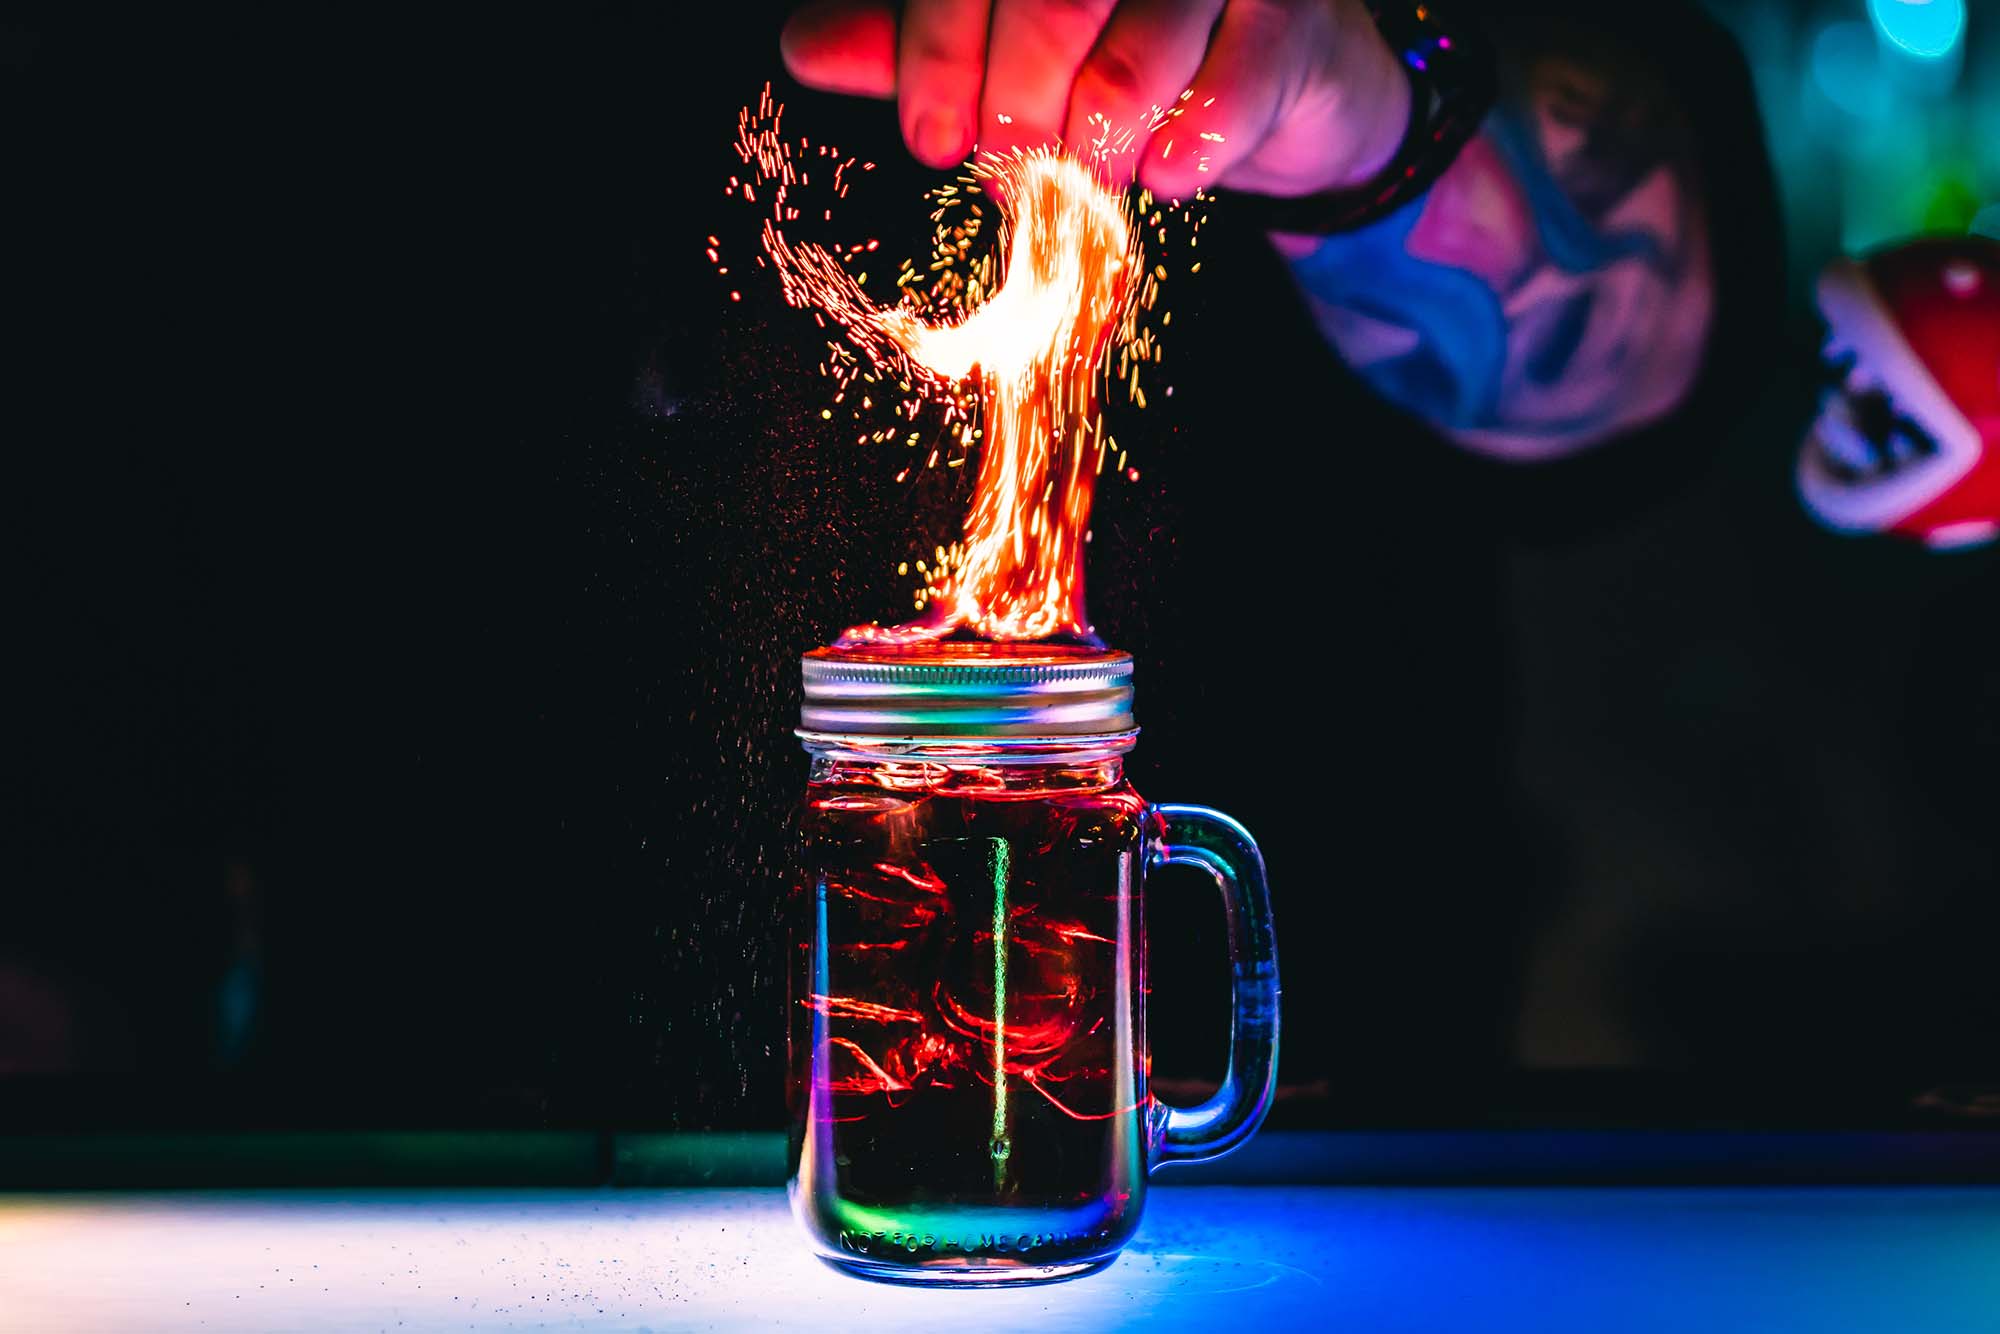 Bartender that sets a drink on fire.